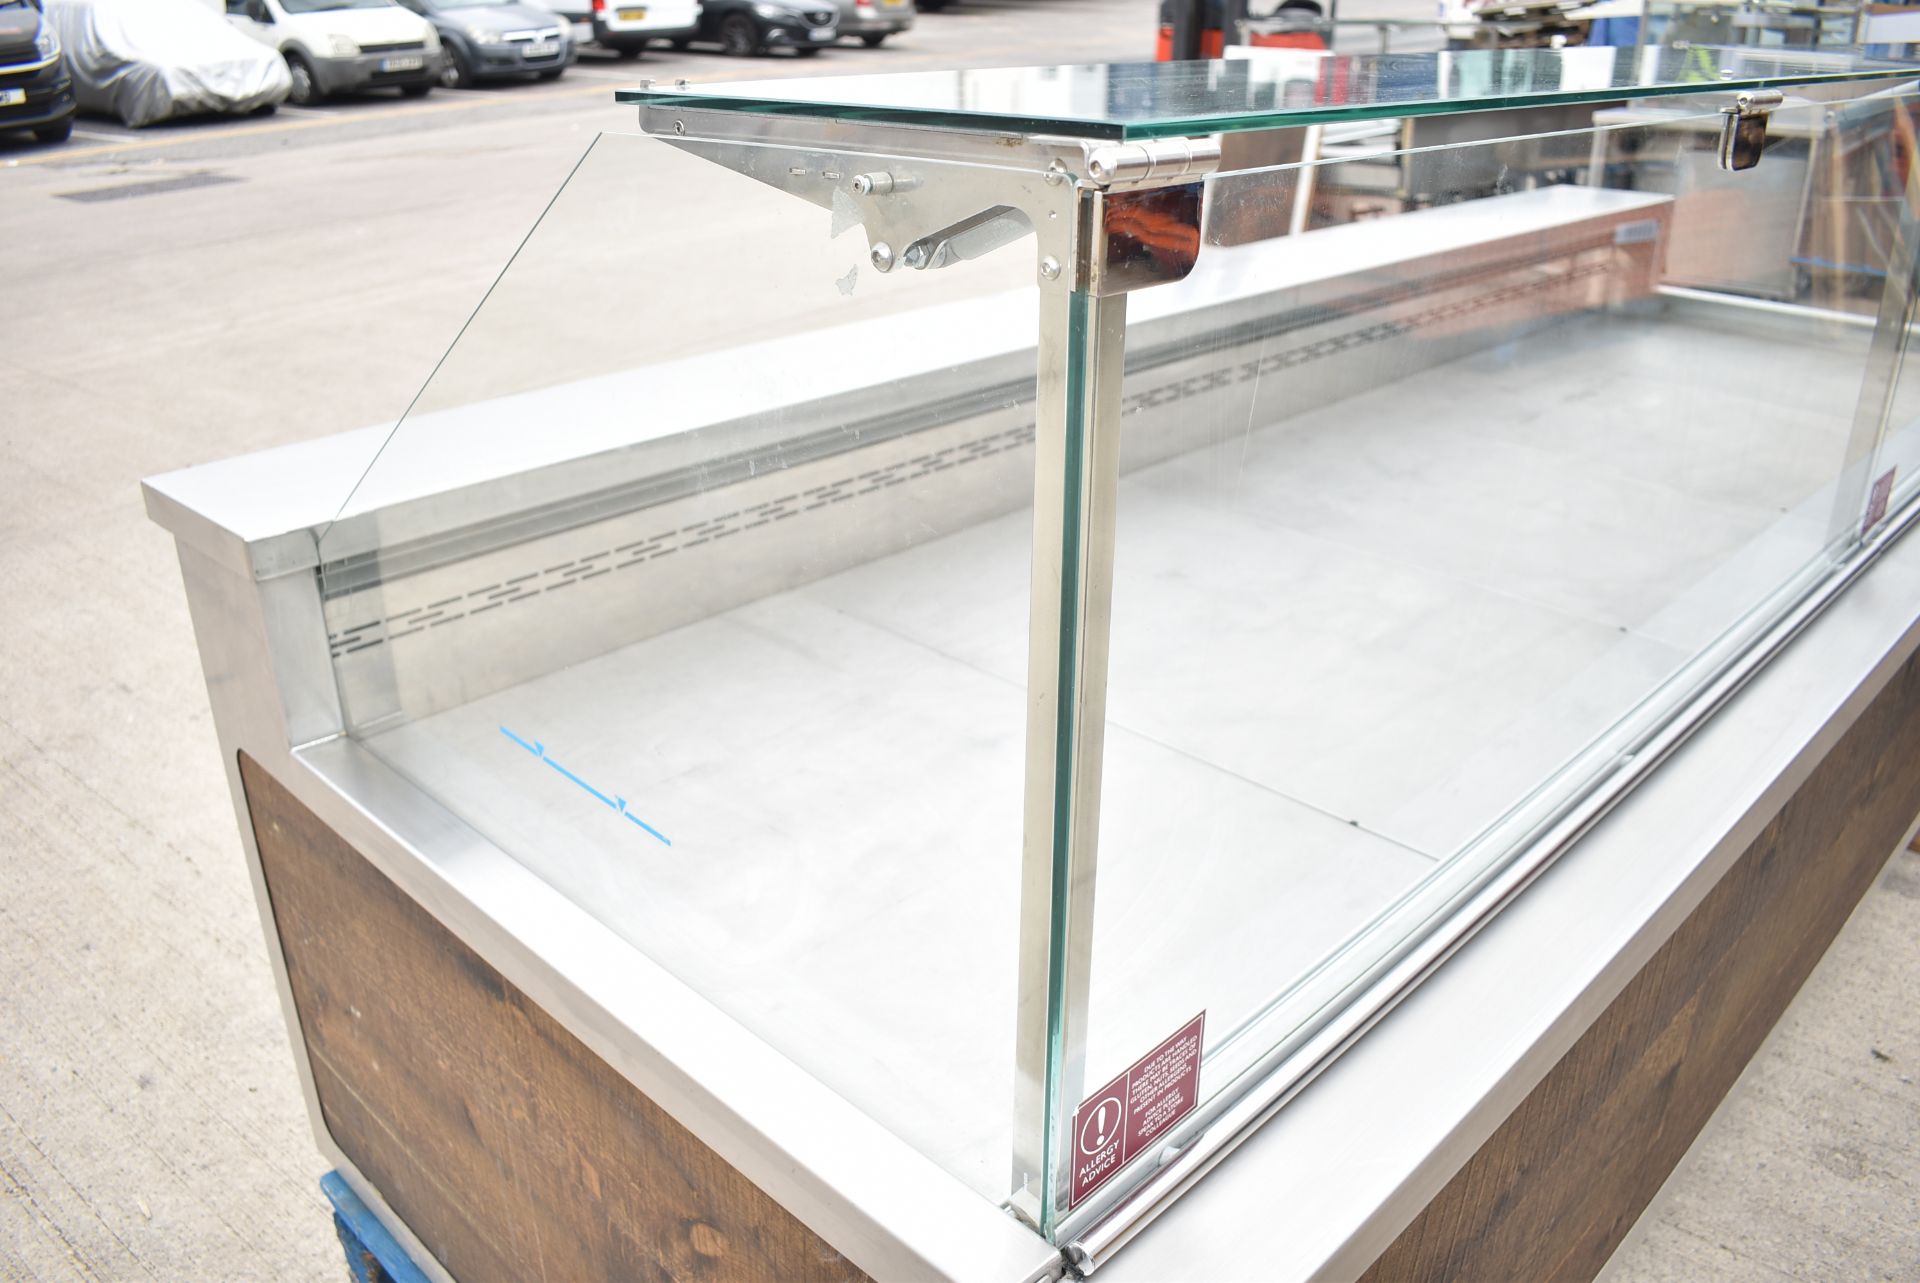 1 x Eurocryor Bistro Refrigerated Retail Counter - Suitable For Takeaways, Butchers, Deli, Cake - Image 12 of 28